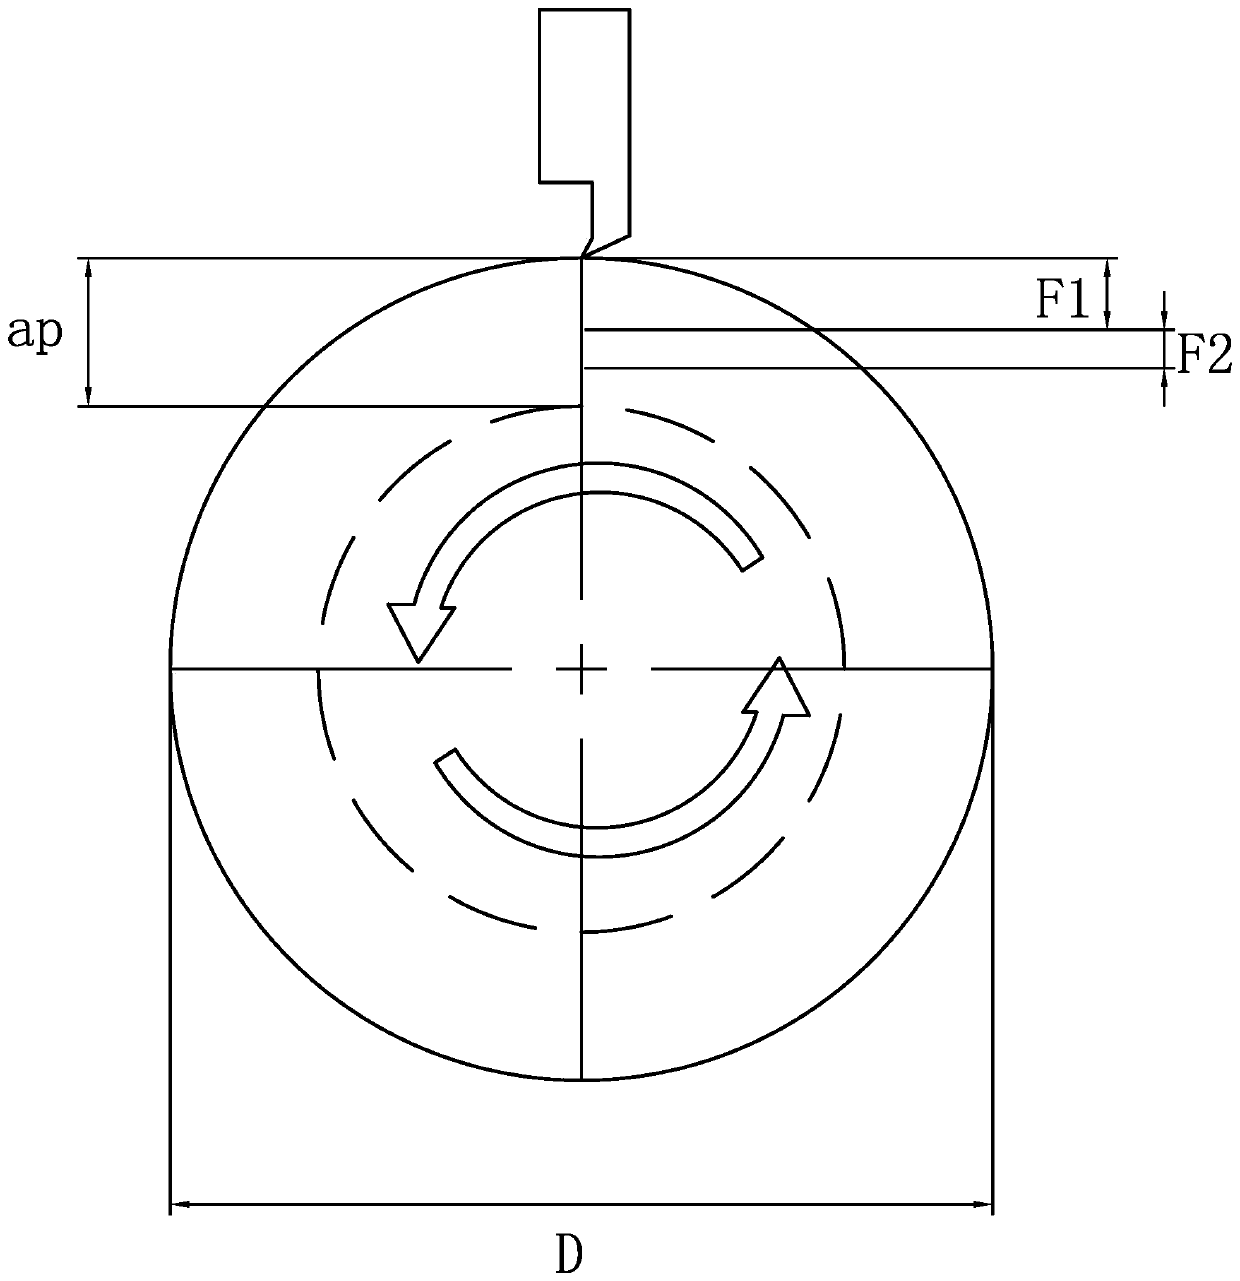 Variable-feed cutting method for circular groove machining